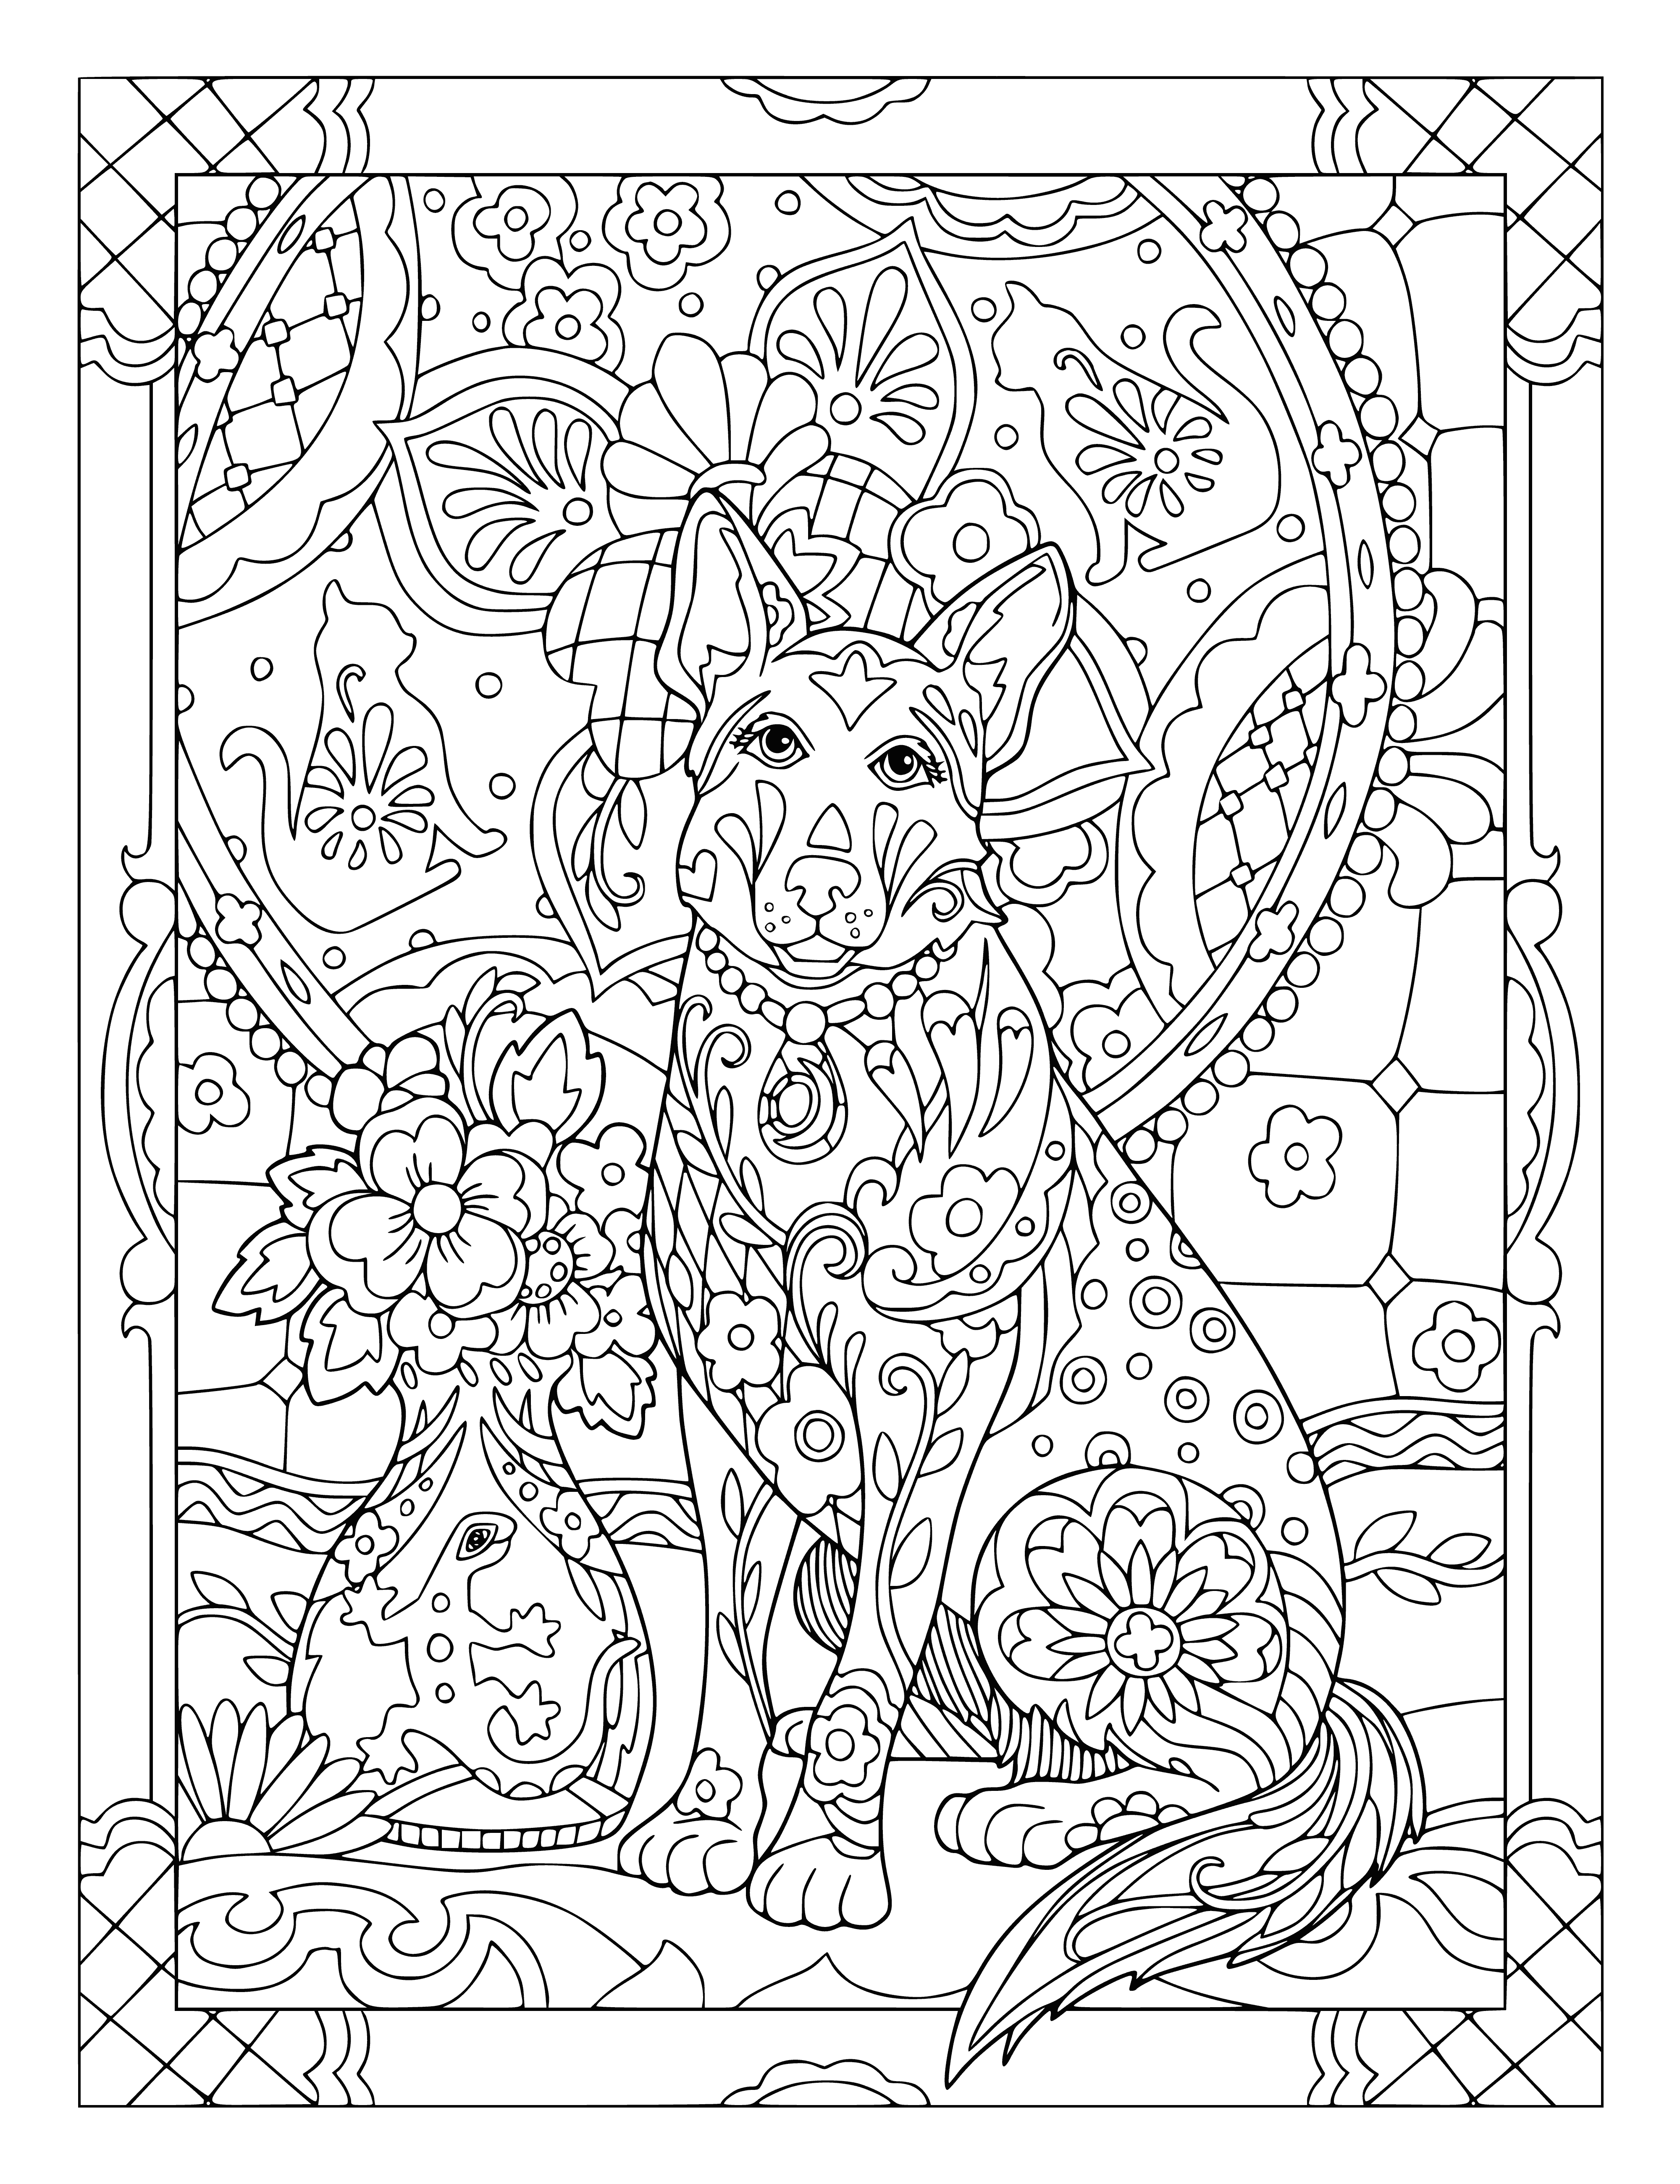 Shepherd and vase coloring page